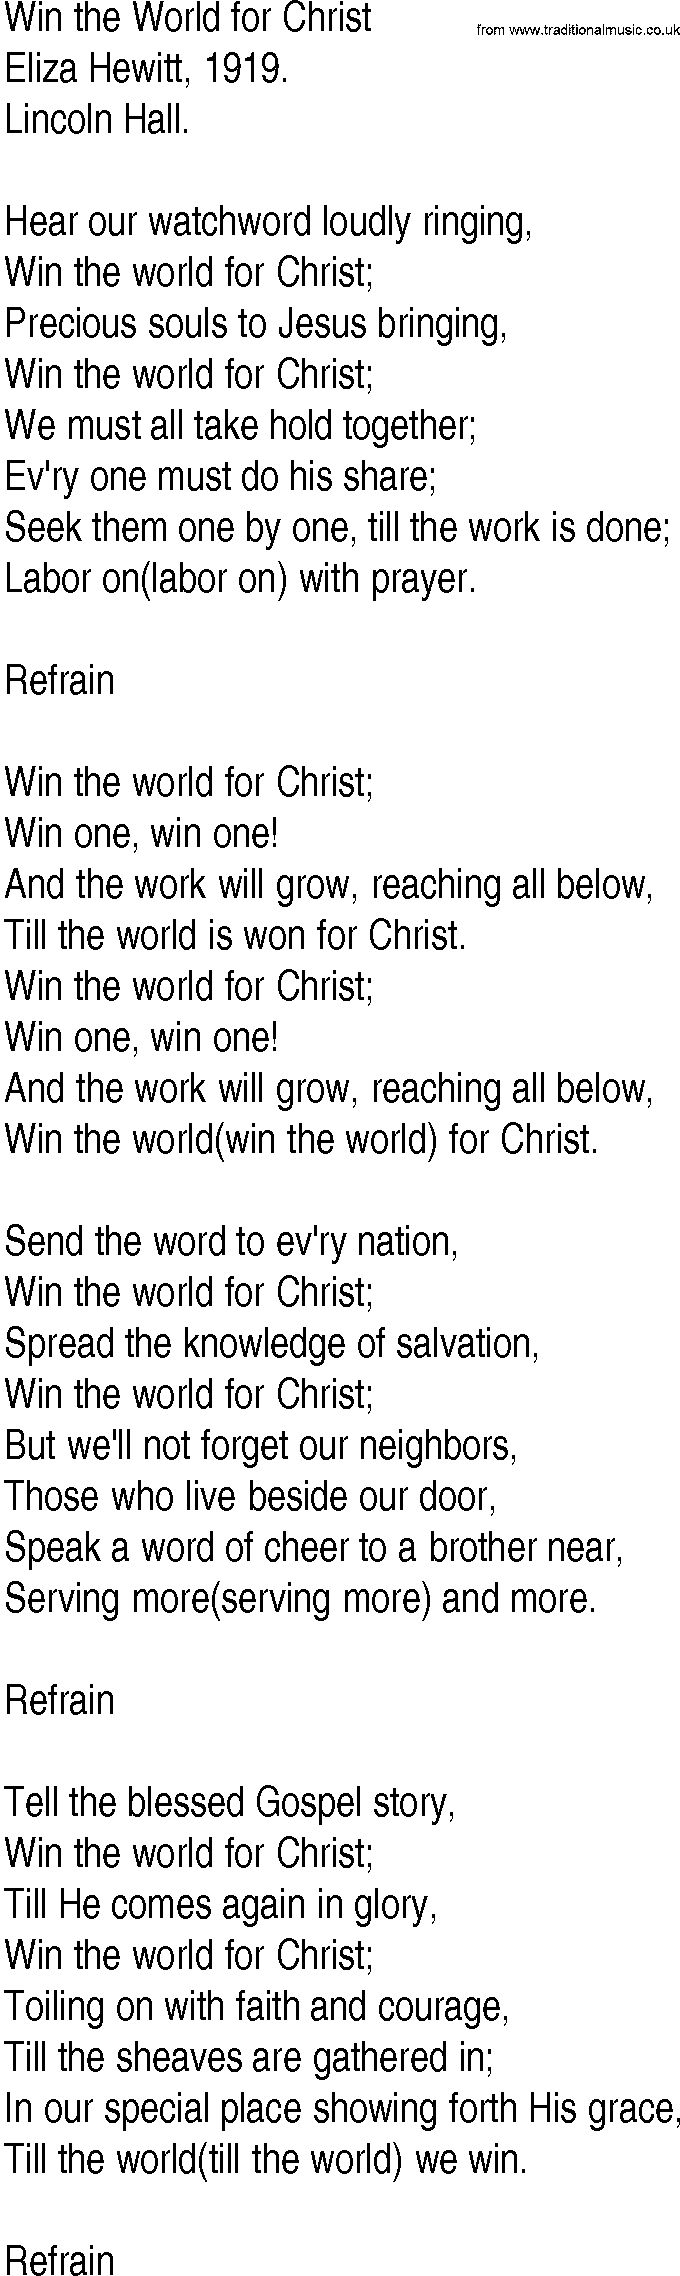 Hymn and Gospel Song: Win the World for Christ by Eliza Hewitt lyrics